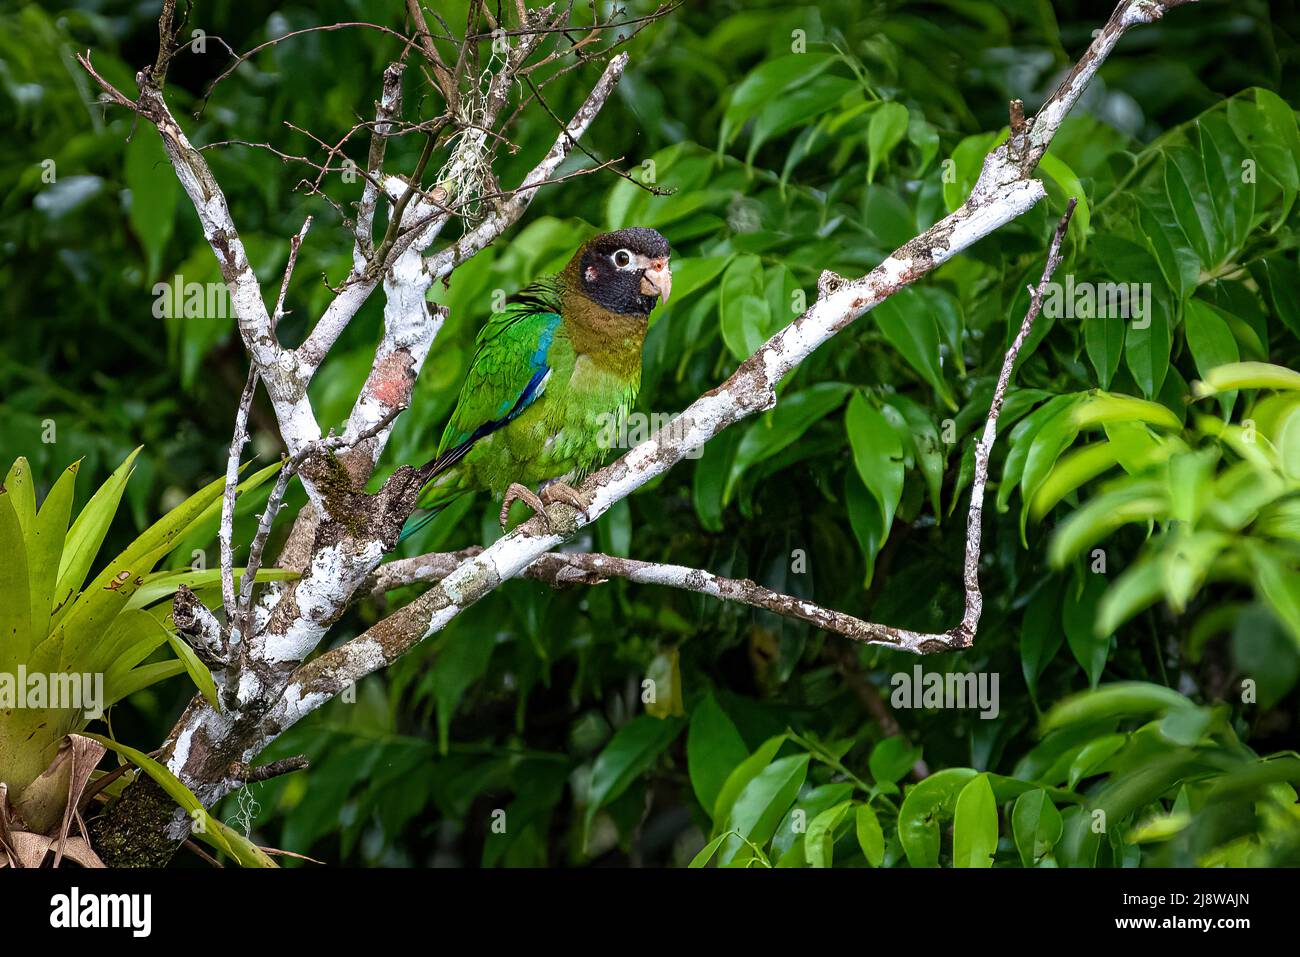 Brown-hooded parrot, Pyrilia haematotis perched in the cloud forest of Panama Stock Photo